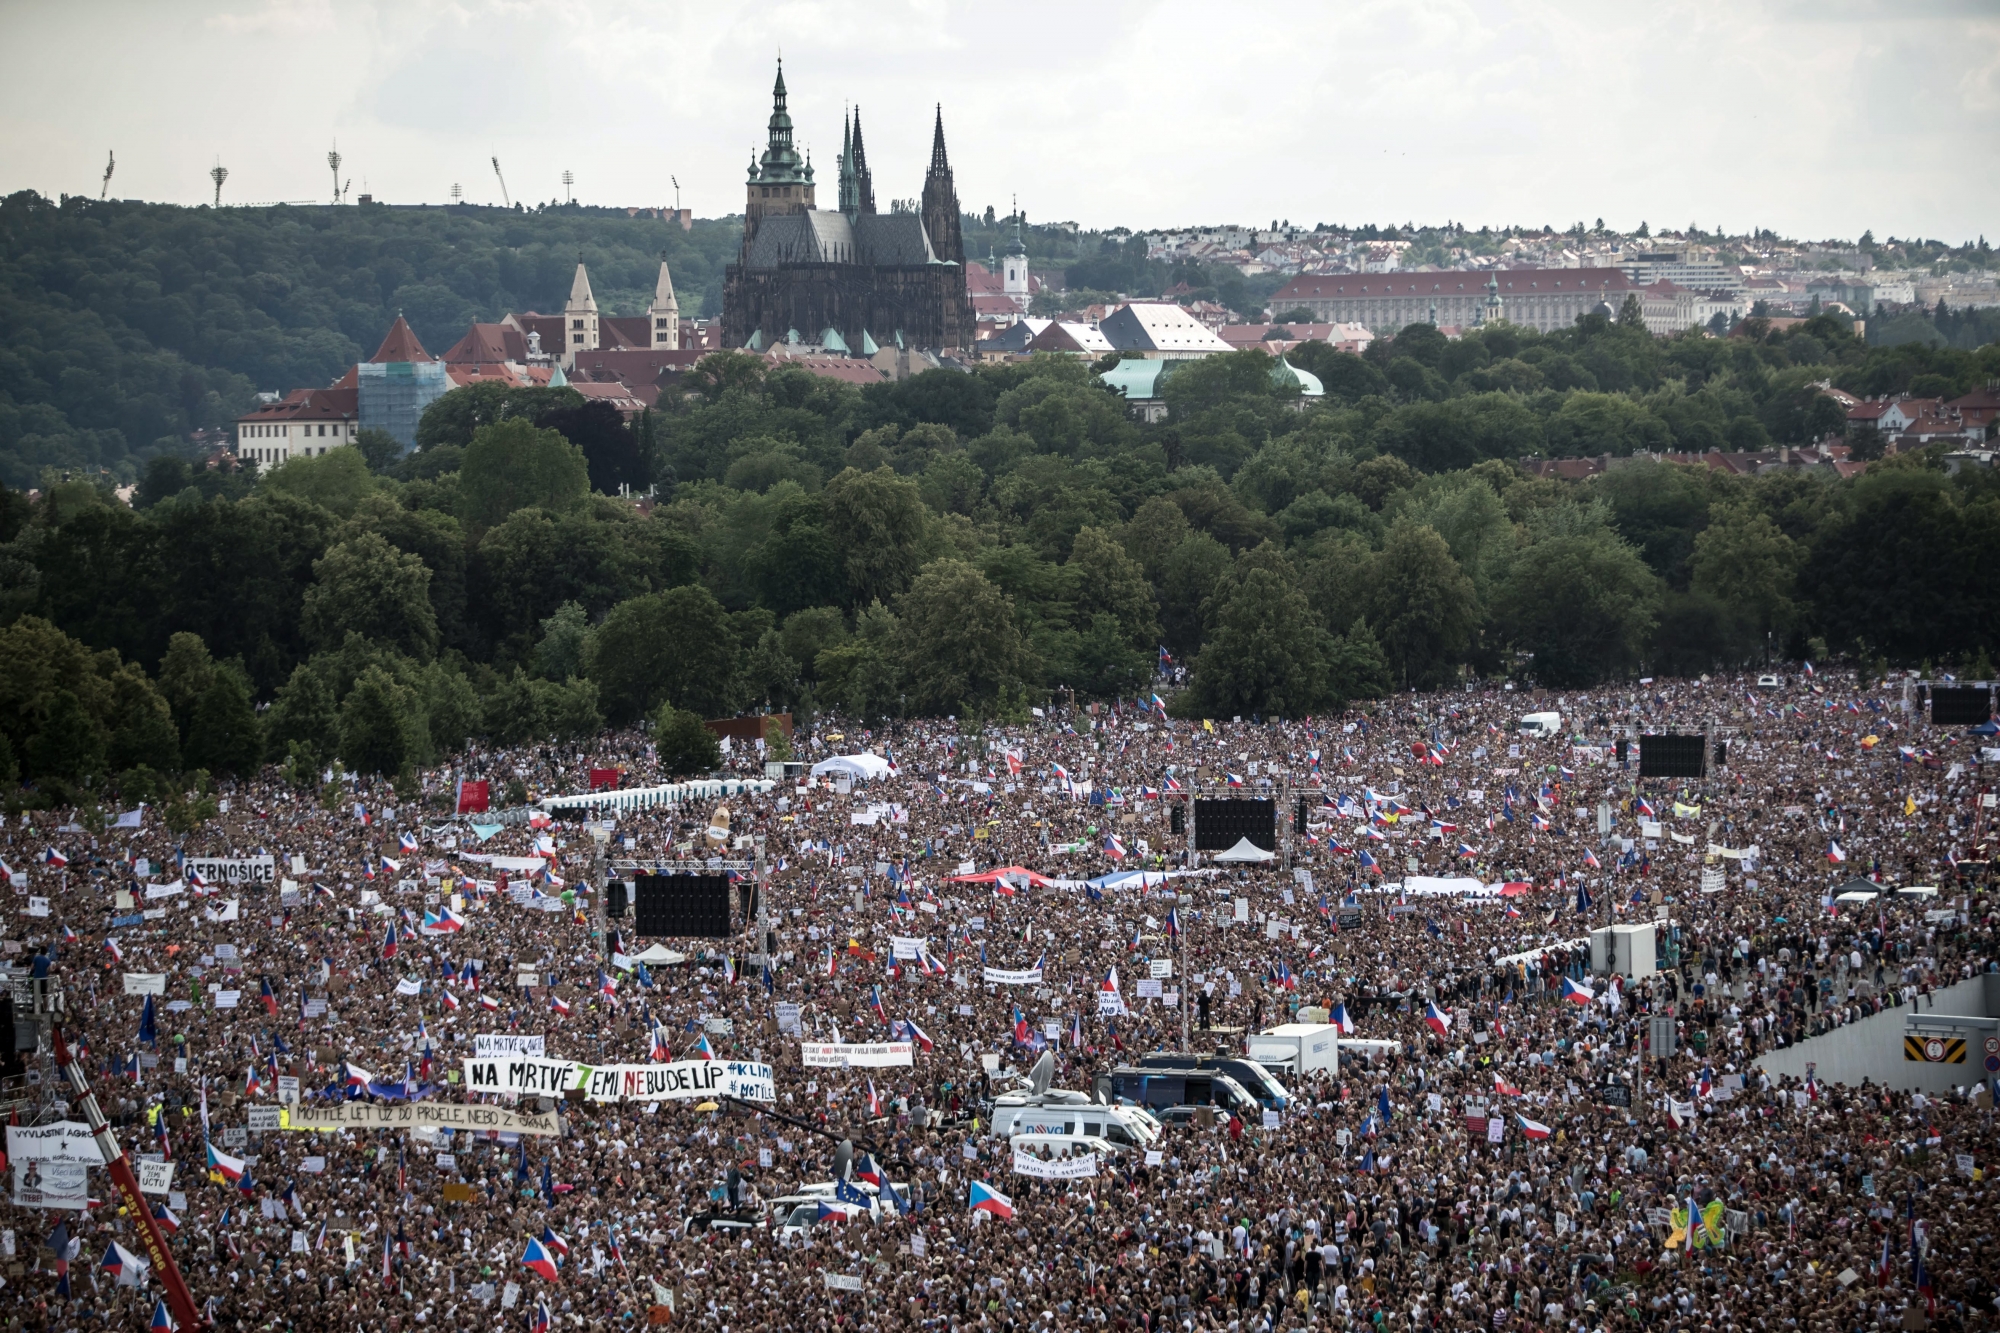 epa07668589 Thousands of demonstrators gather to protest against Czech Prime Minister Andrej Babis and new minister of justice, in the one of the biggest political demonstration against the government since the fall of communism in 1989 during Velvet Revolution, at the Letna plain in Prague, Czech Republic, 23 June 2019. According to reports, tens of thousands people protest against appointing Marie Benesova as new justice minister and to demand the resignation of Czech Prime Minister Andrej Babis due to alleged conflicts of interest involving his former Agrofert conglomerate he founded and at the same time he is investigated of fraud in connection with subsidies paid by the European Union. The report suggests the country should return about 17.5 million euro that Agrofert received in EU funds.  EPA/MARTIN DIVISEK CZECH REPUBLIC GOVERNMENT PROTEST